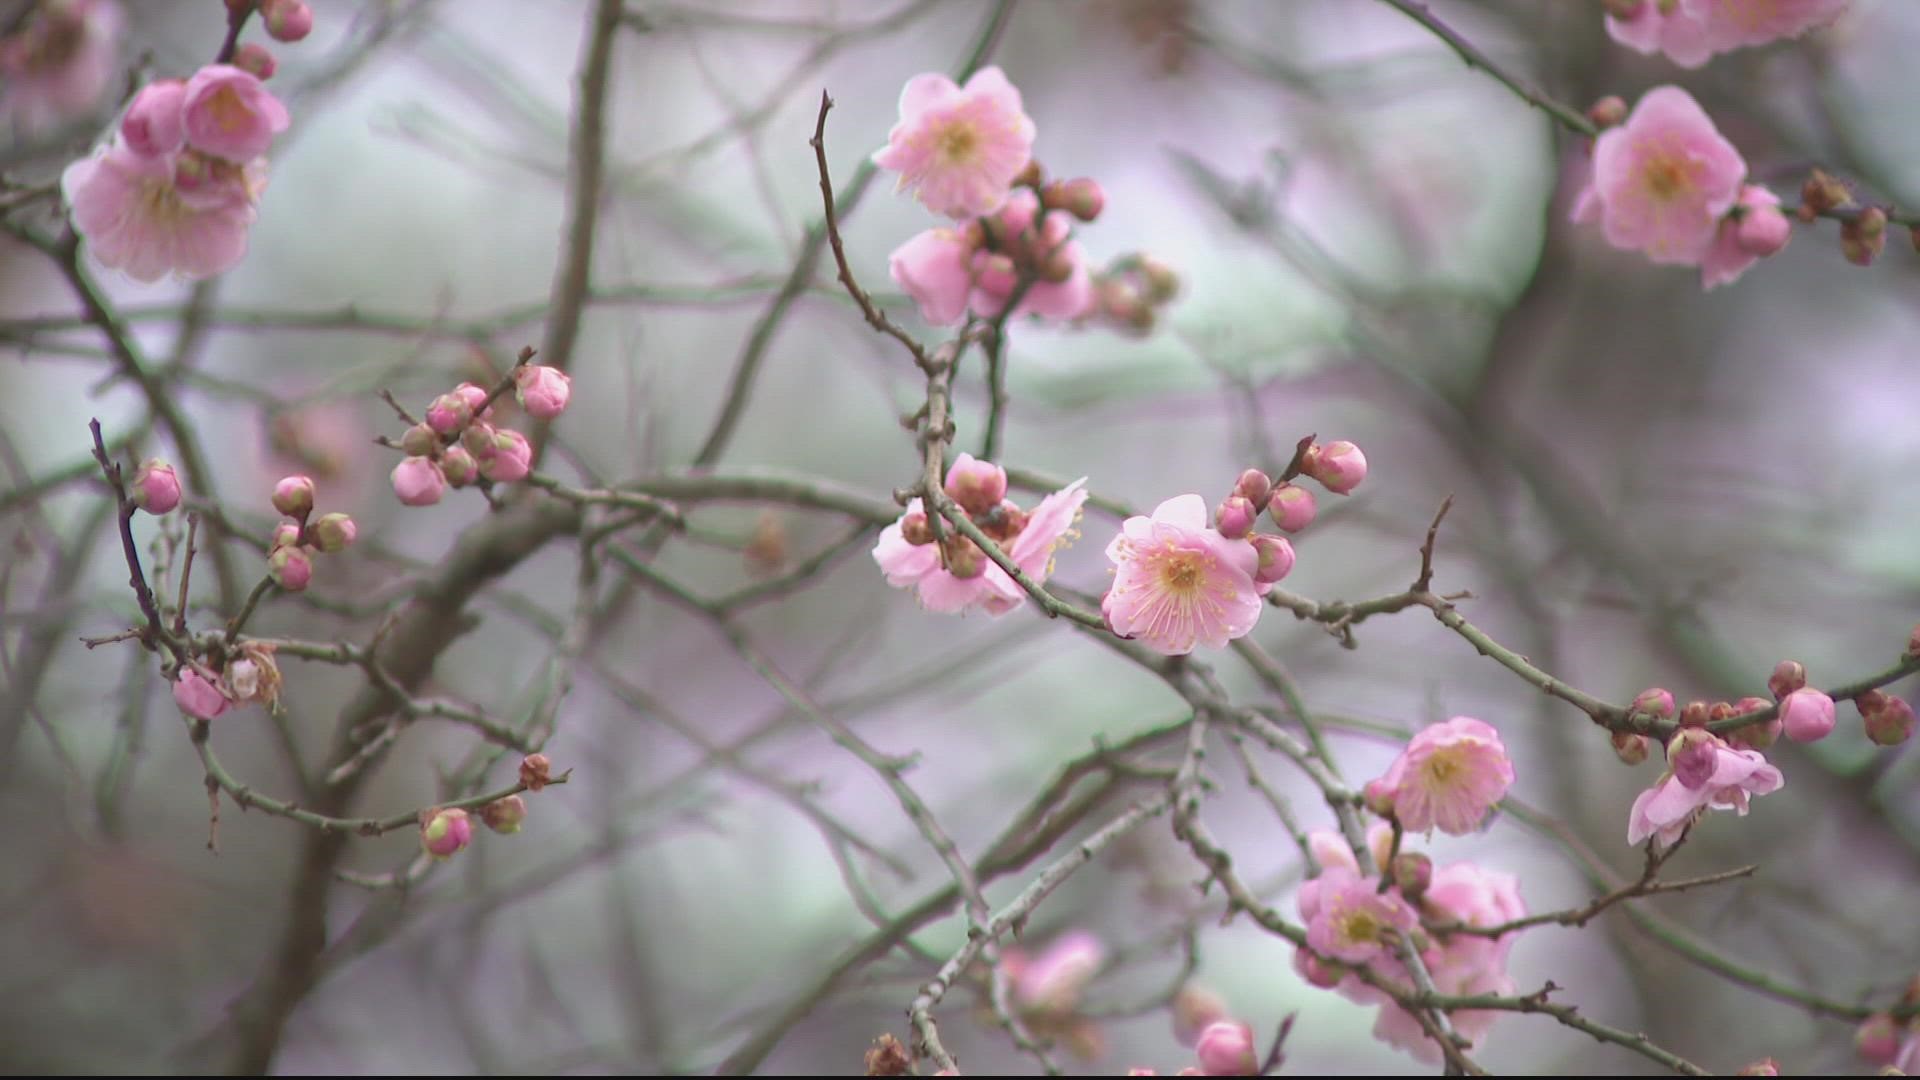 Early blooming of cherry blossoms concerns climate experts - The